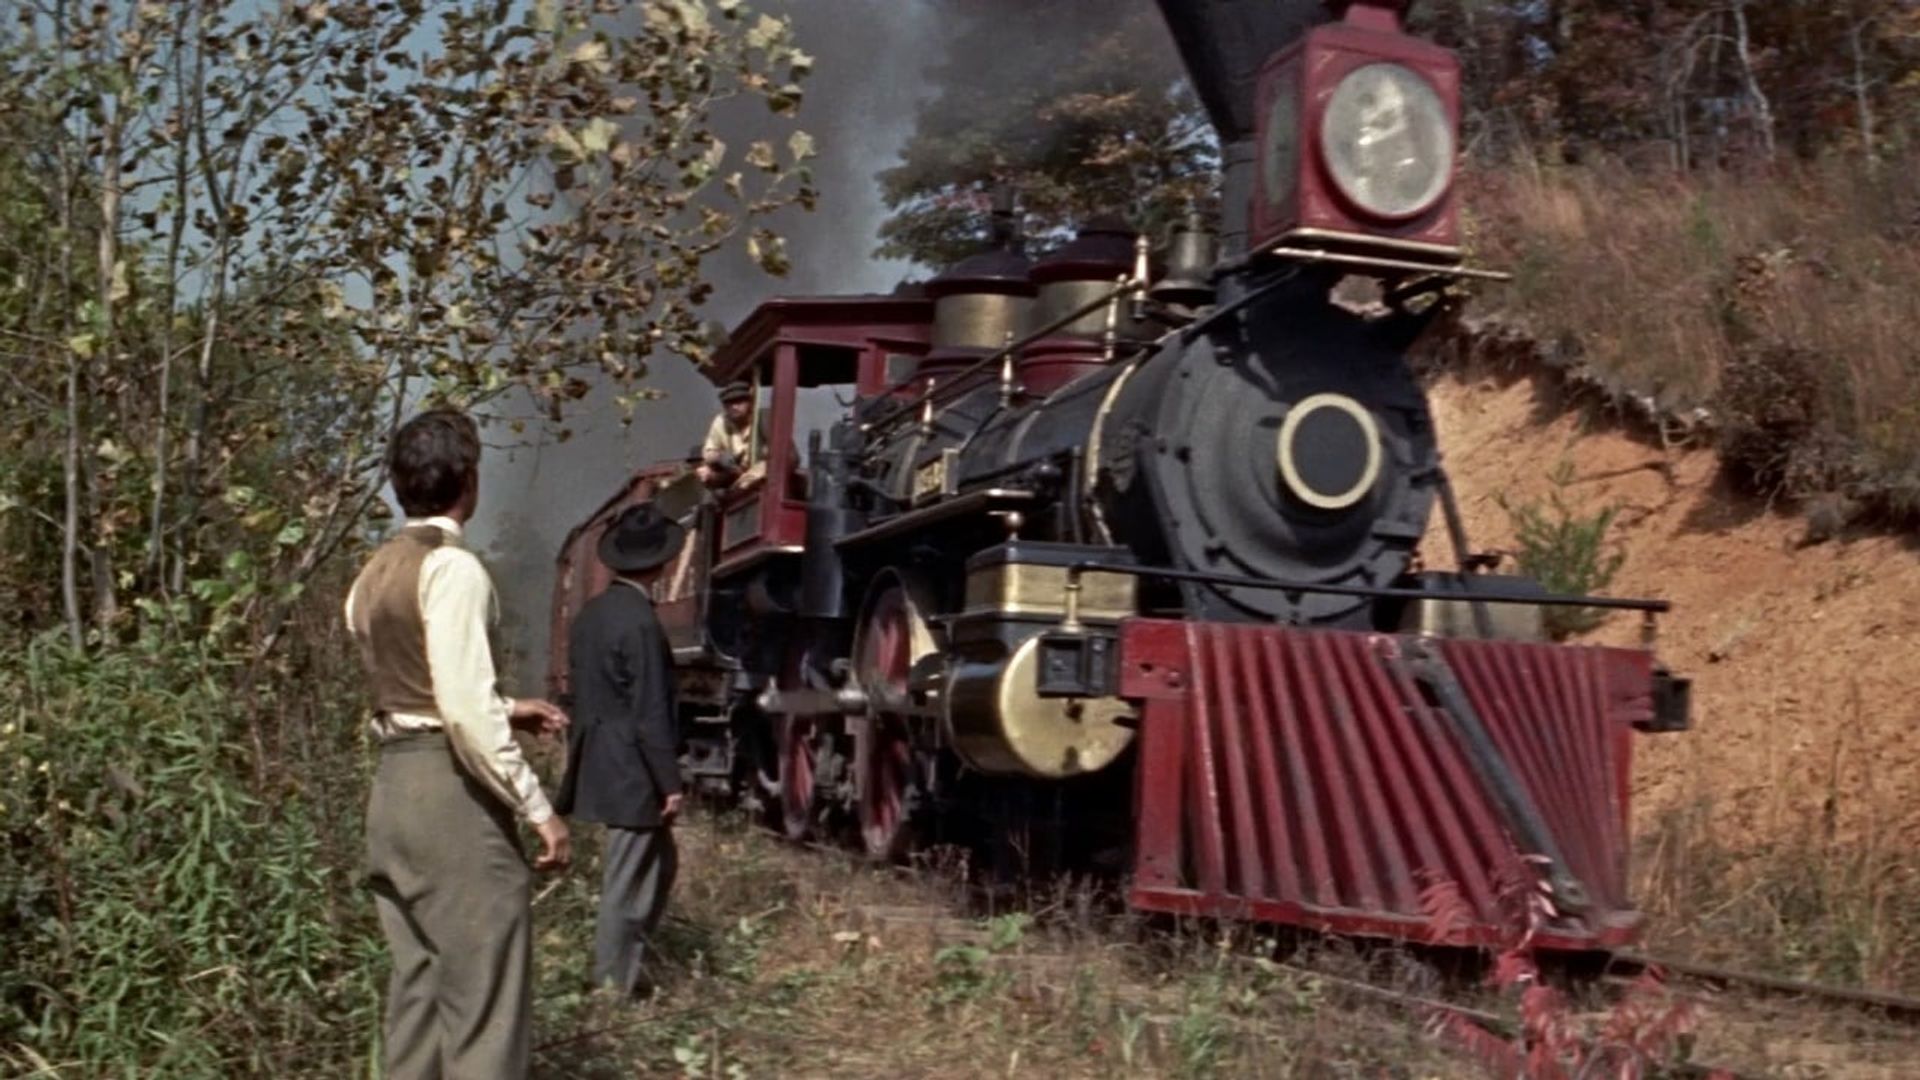 The Great Locomotive Chase Backdrop